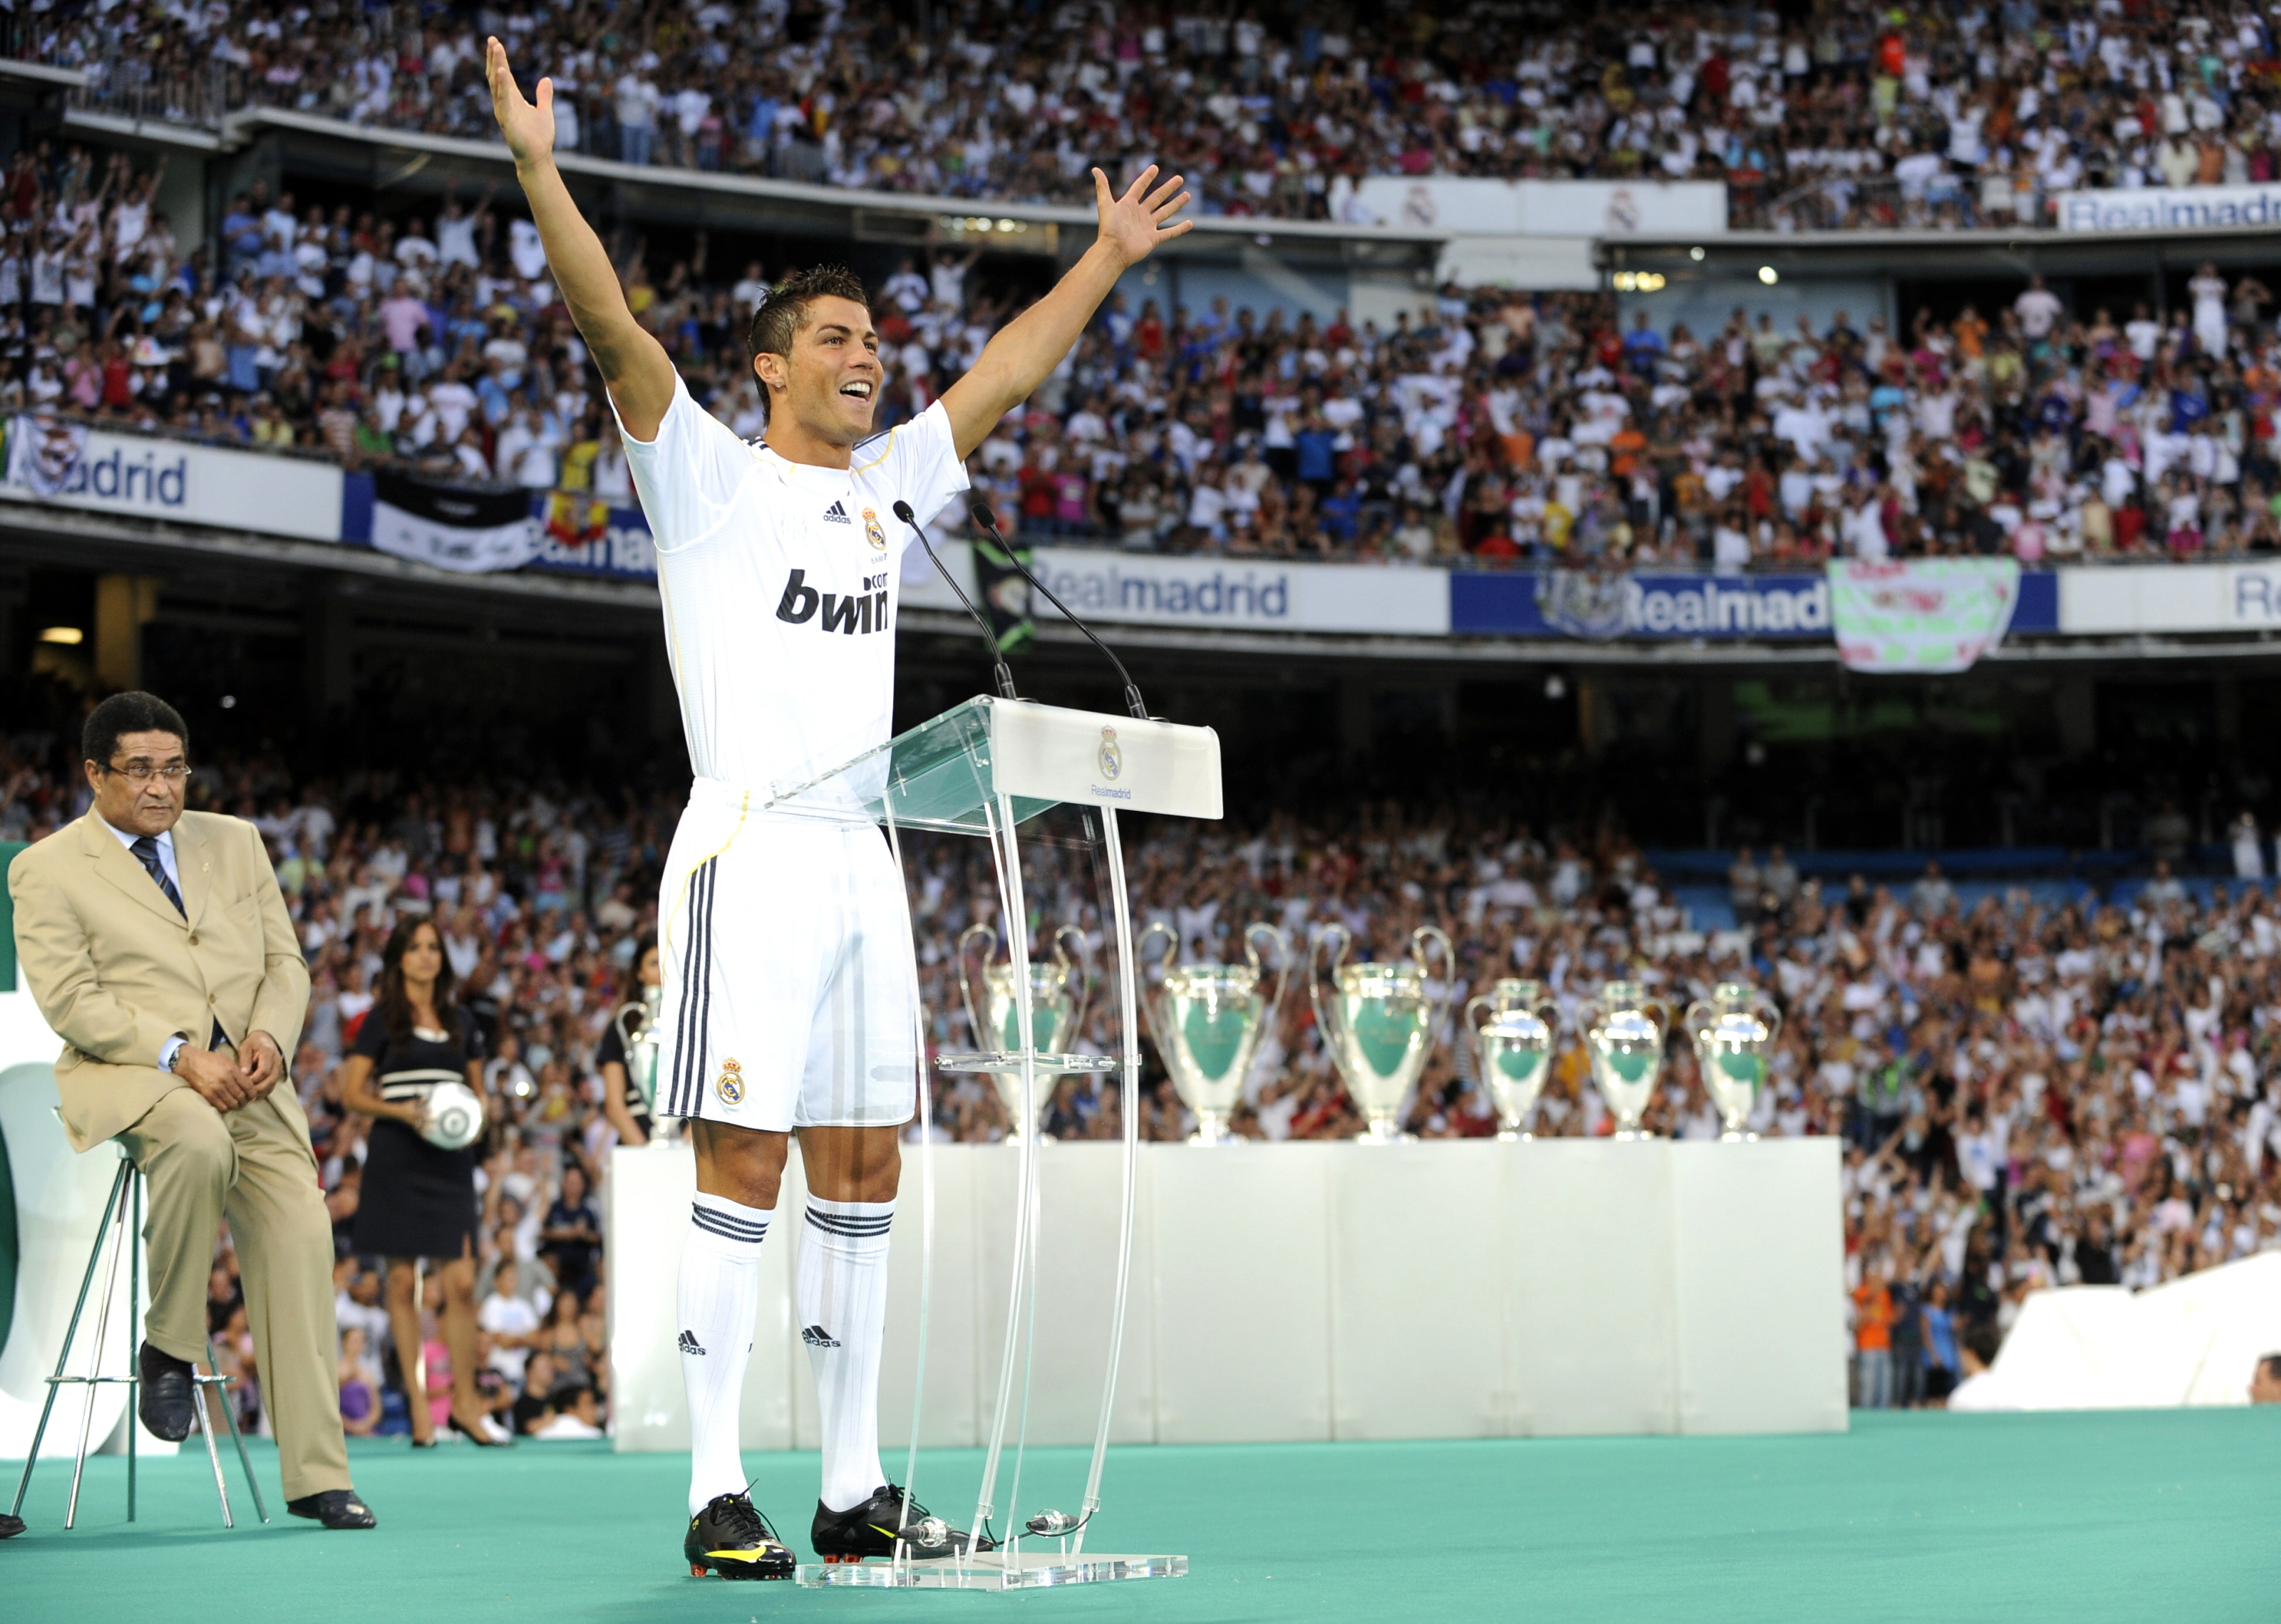 Real Madrid Transfers: 3 pros and cons of reuniting with Cristiano Ronaldo